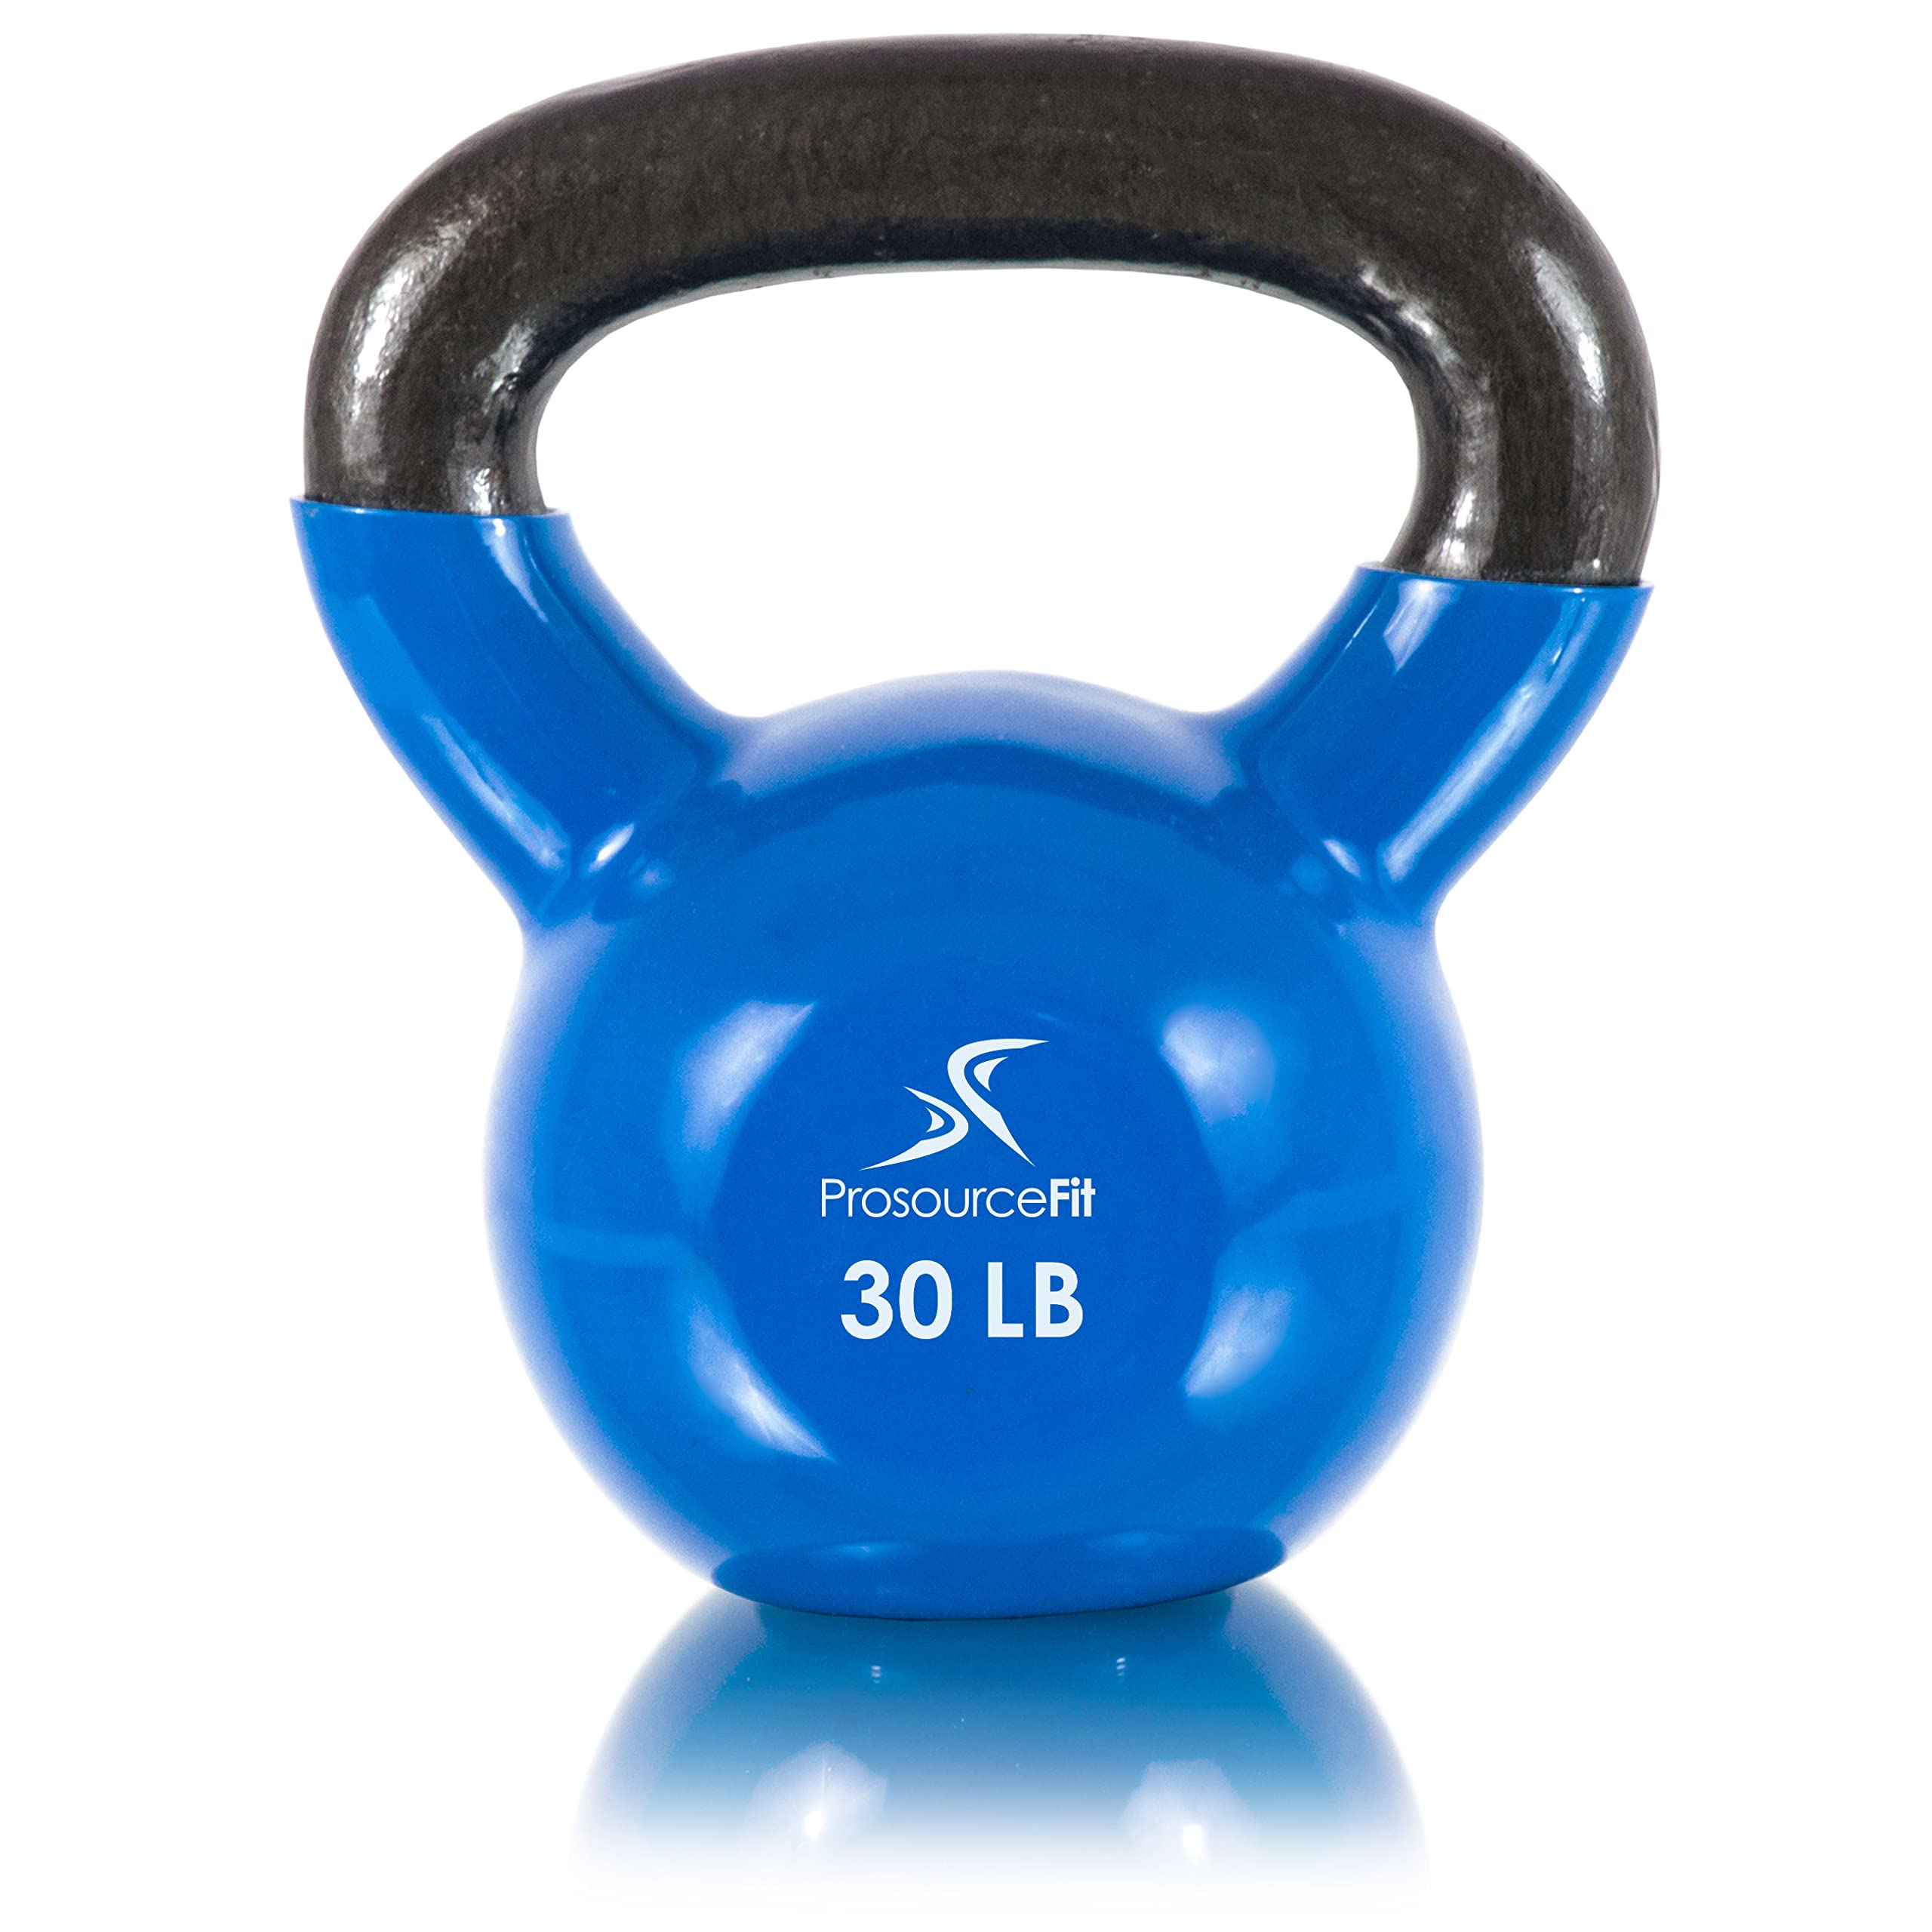 ProsourceFit Vinyl Coated Cast Iron Kettlebells for Full Body Fitness Workouts, Blue, 30LB